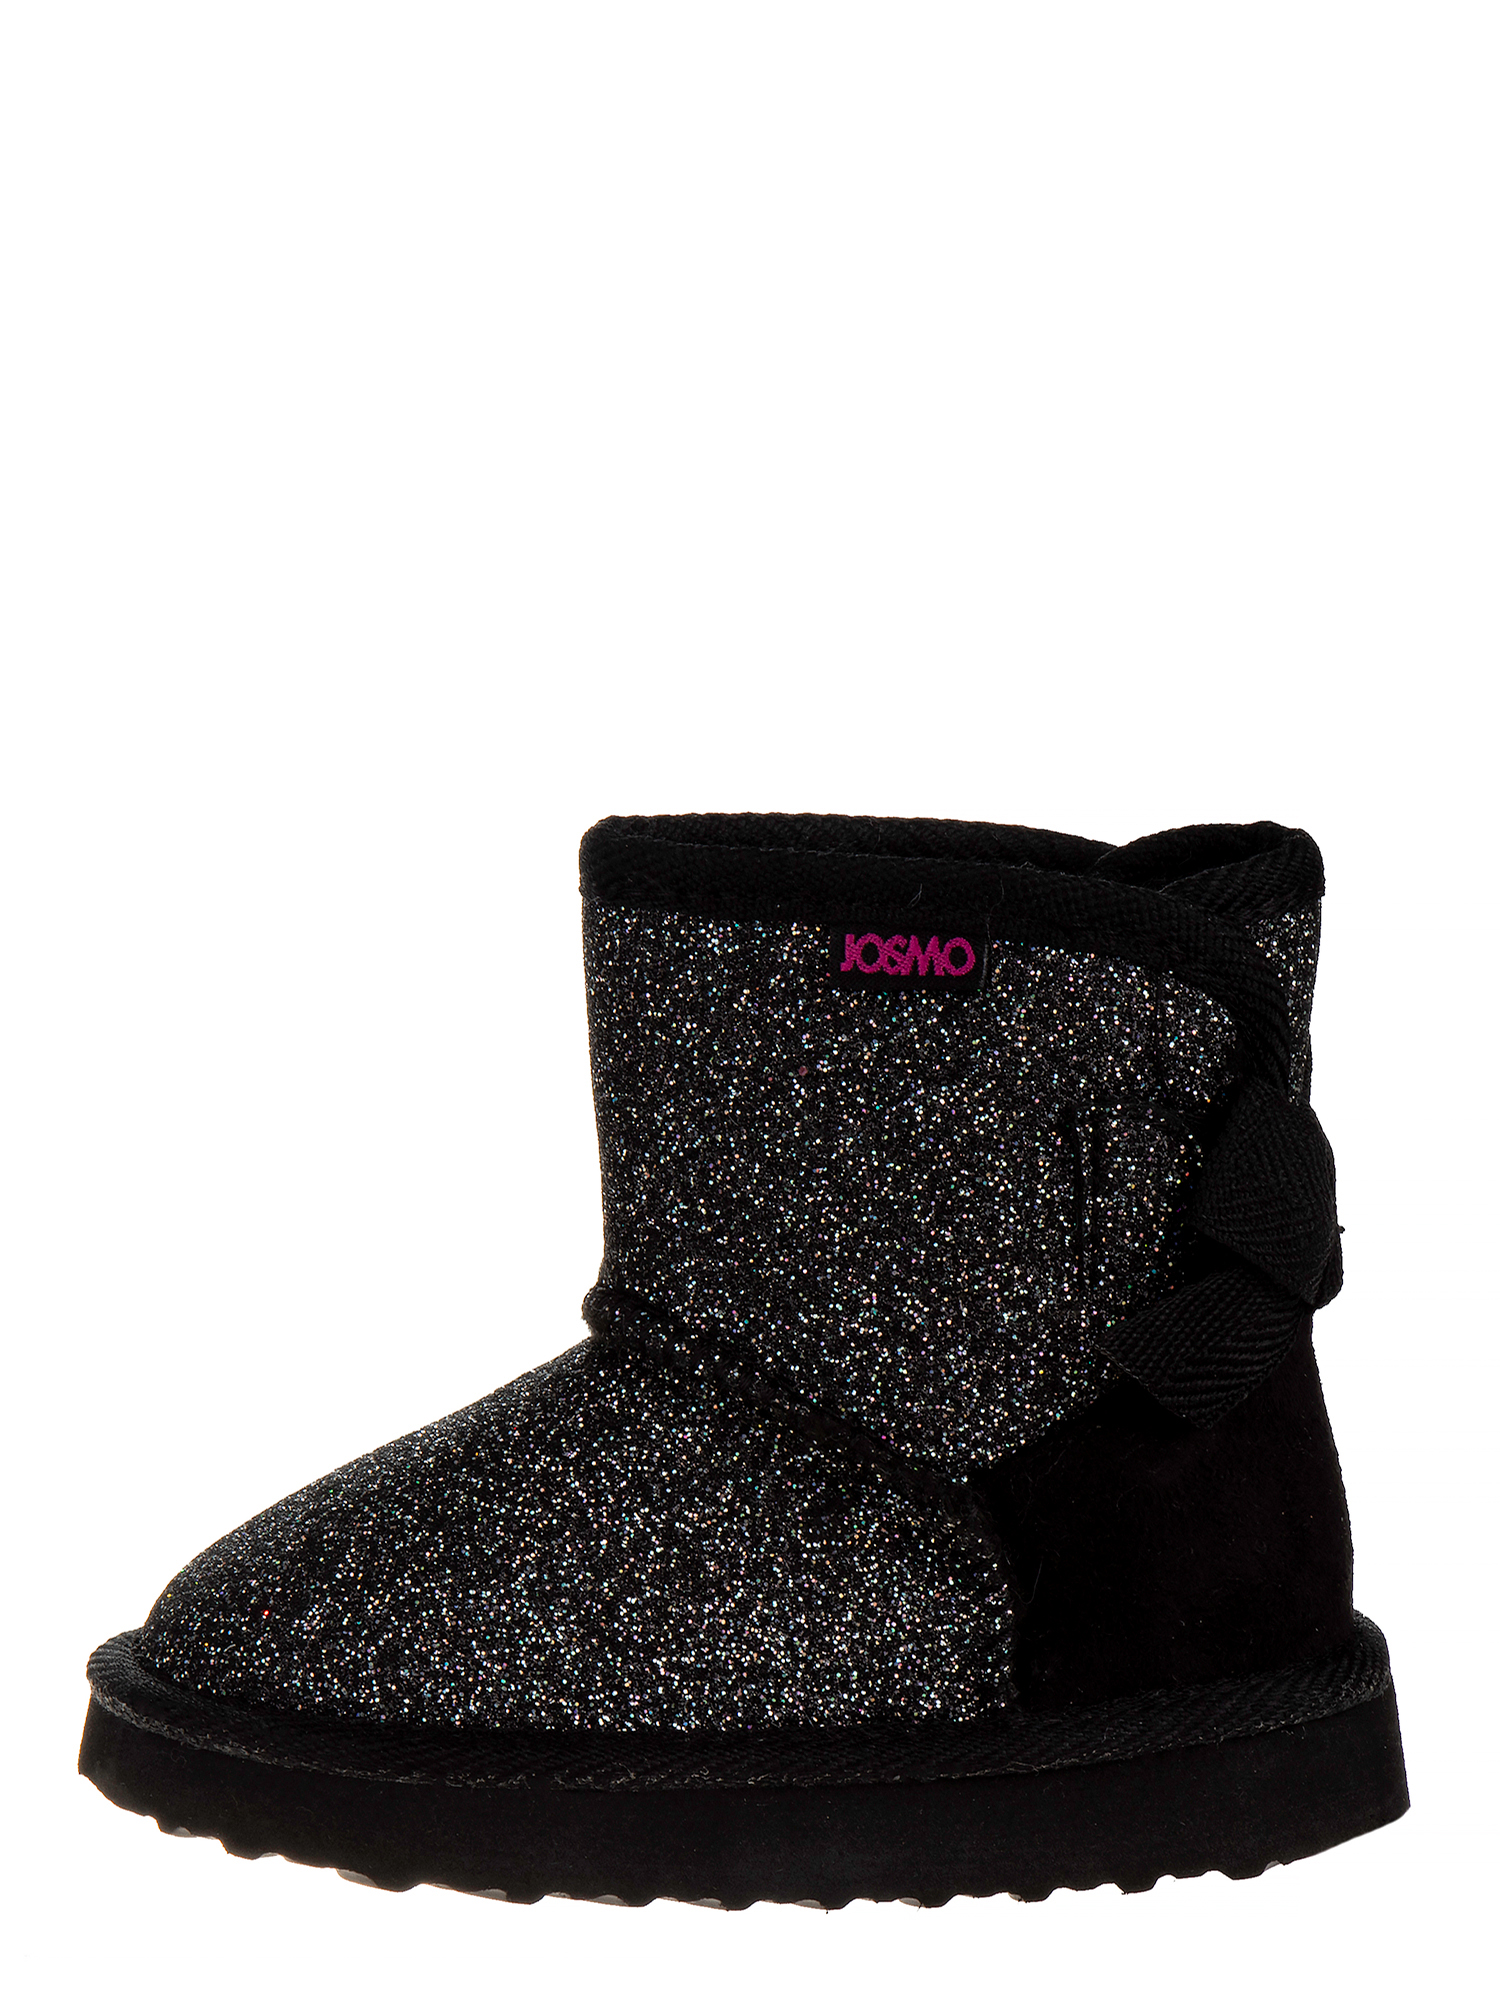 Josmo Glitter & Bows Faux Shearling Ankle Boot (Toddler Girls) - image 2 of 5